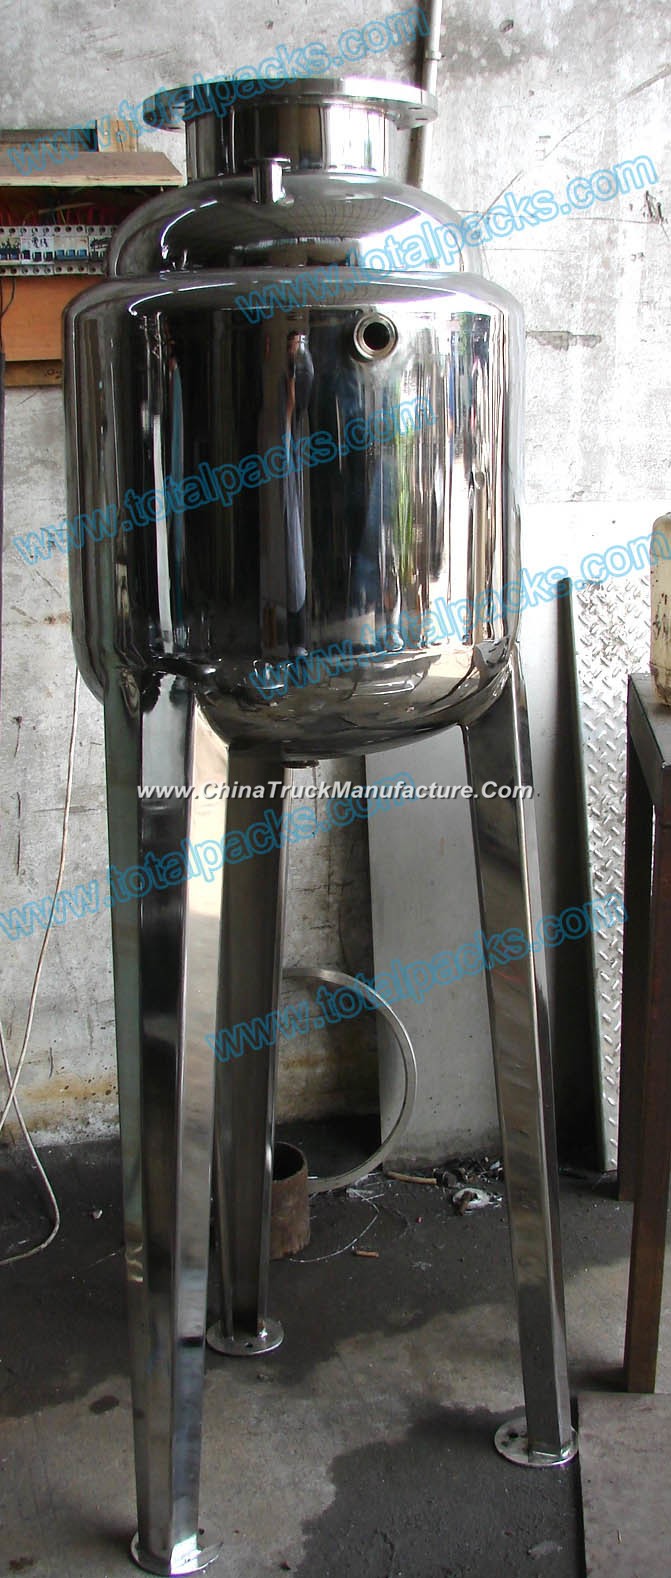 Stainless Steel Mixing Storage Tank for Tooth Paste (ACC-140)